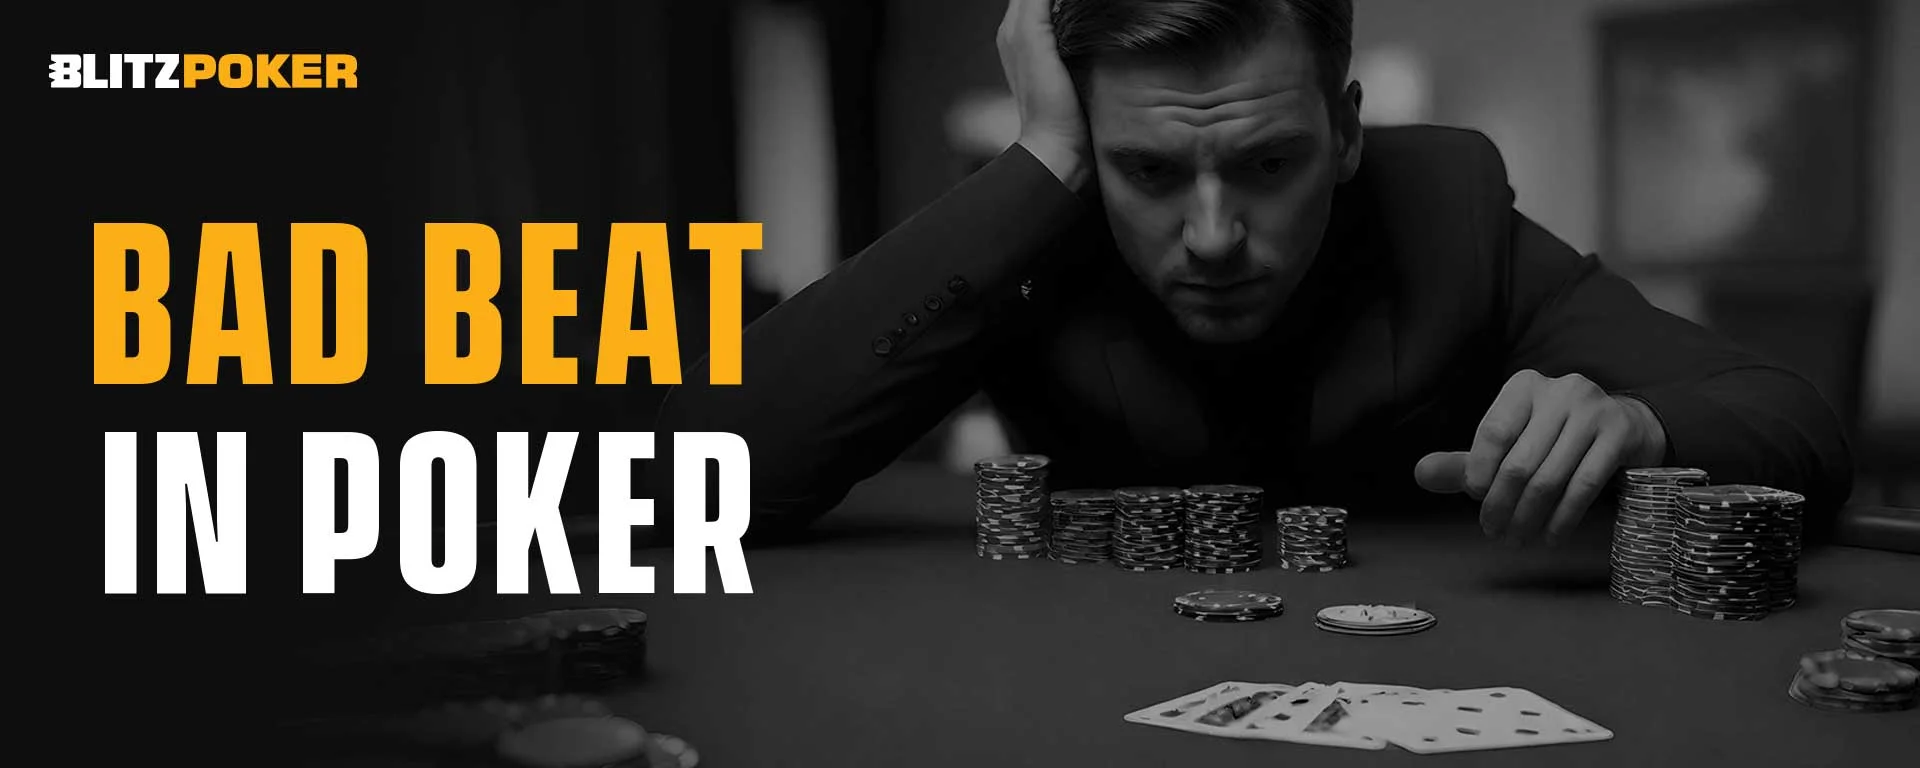 Bad Beat In Poker: Meaning, Examples, Strategies & More